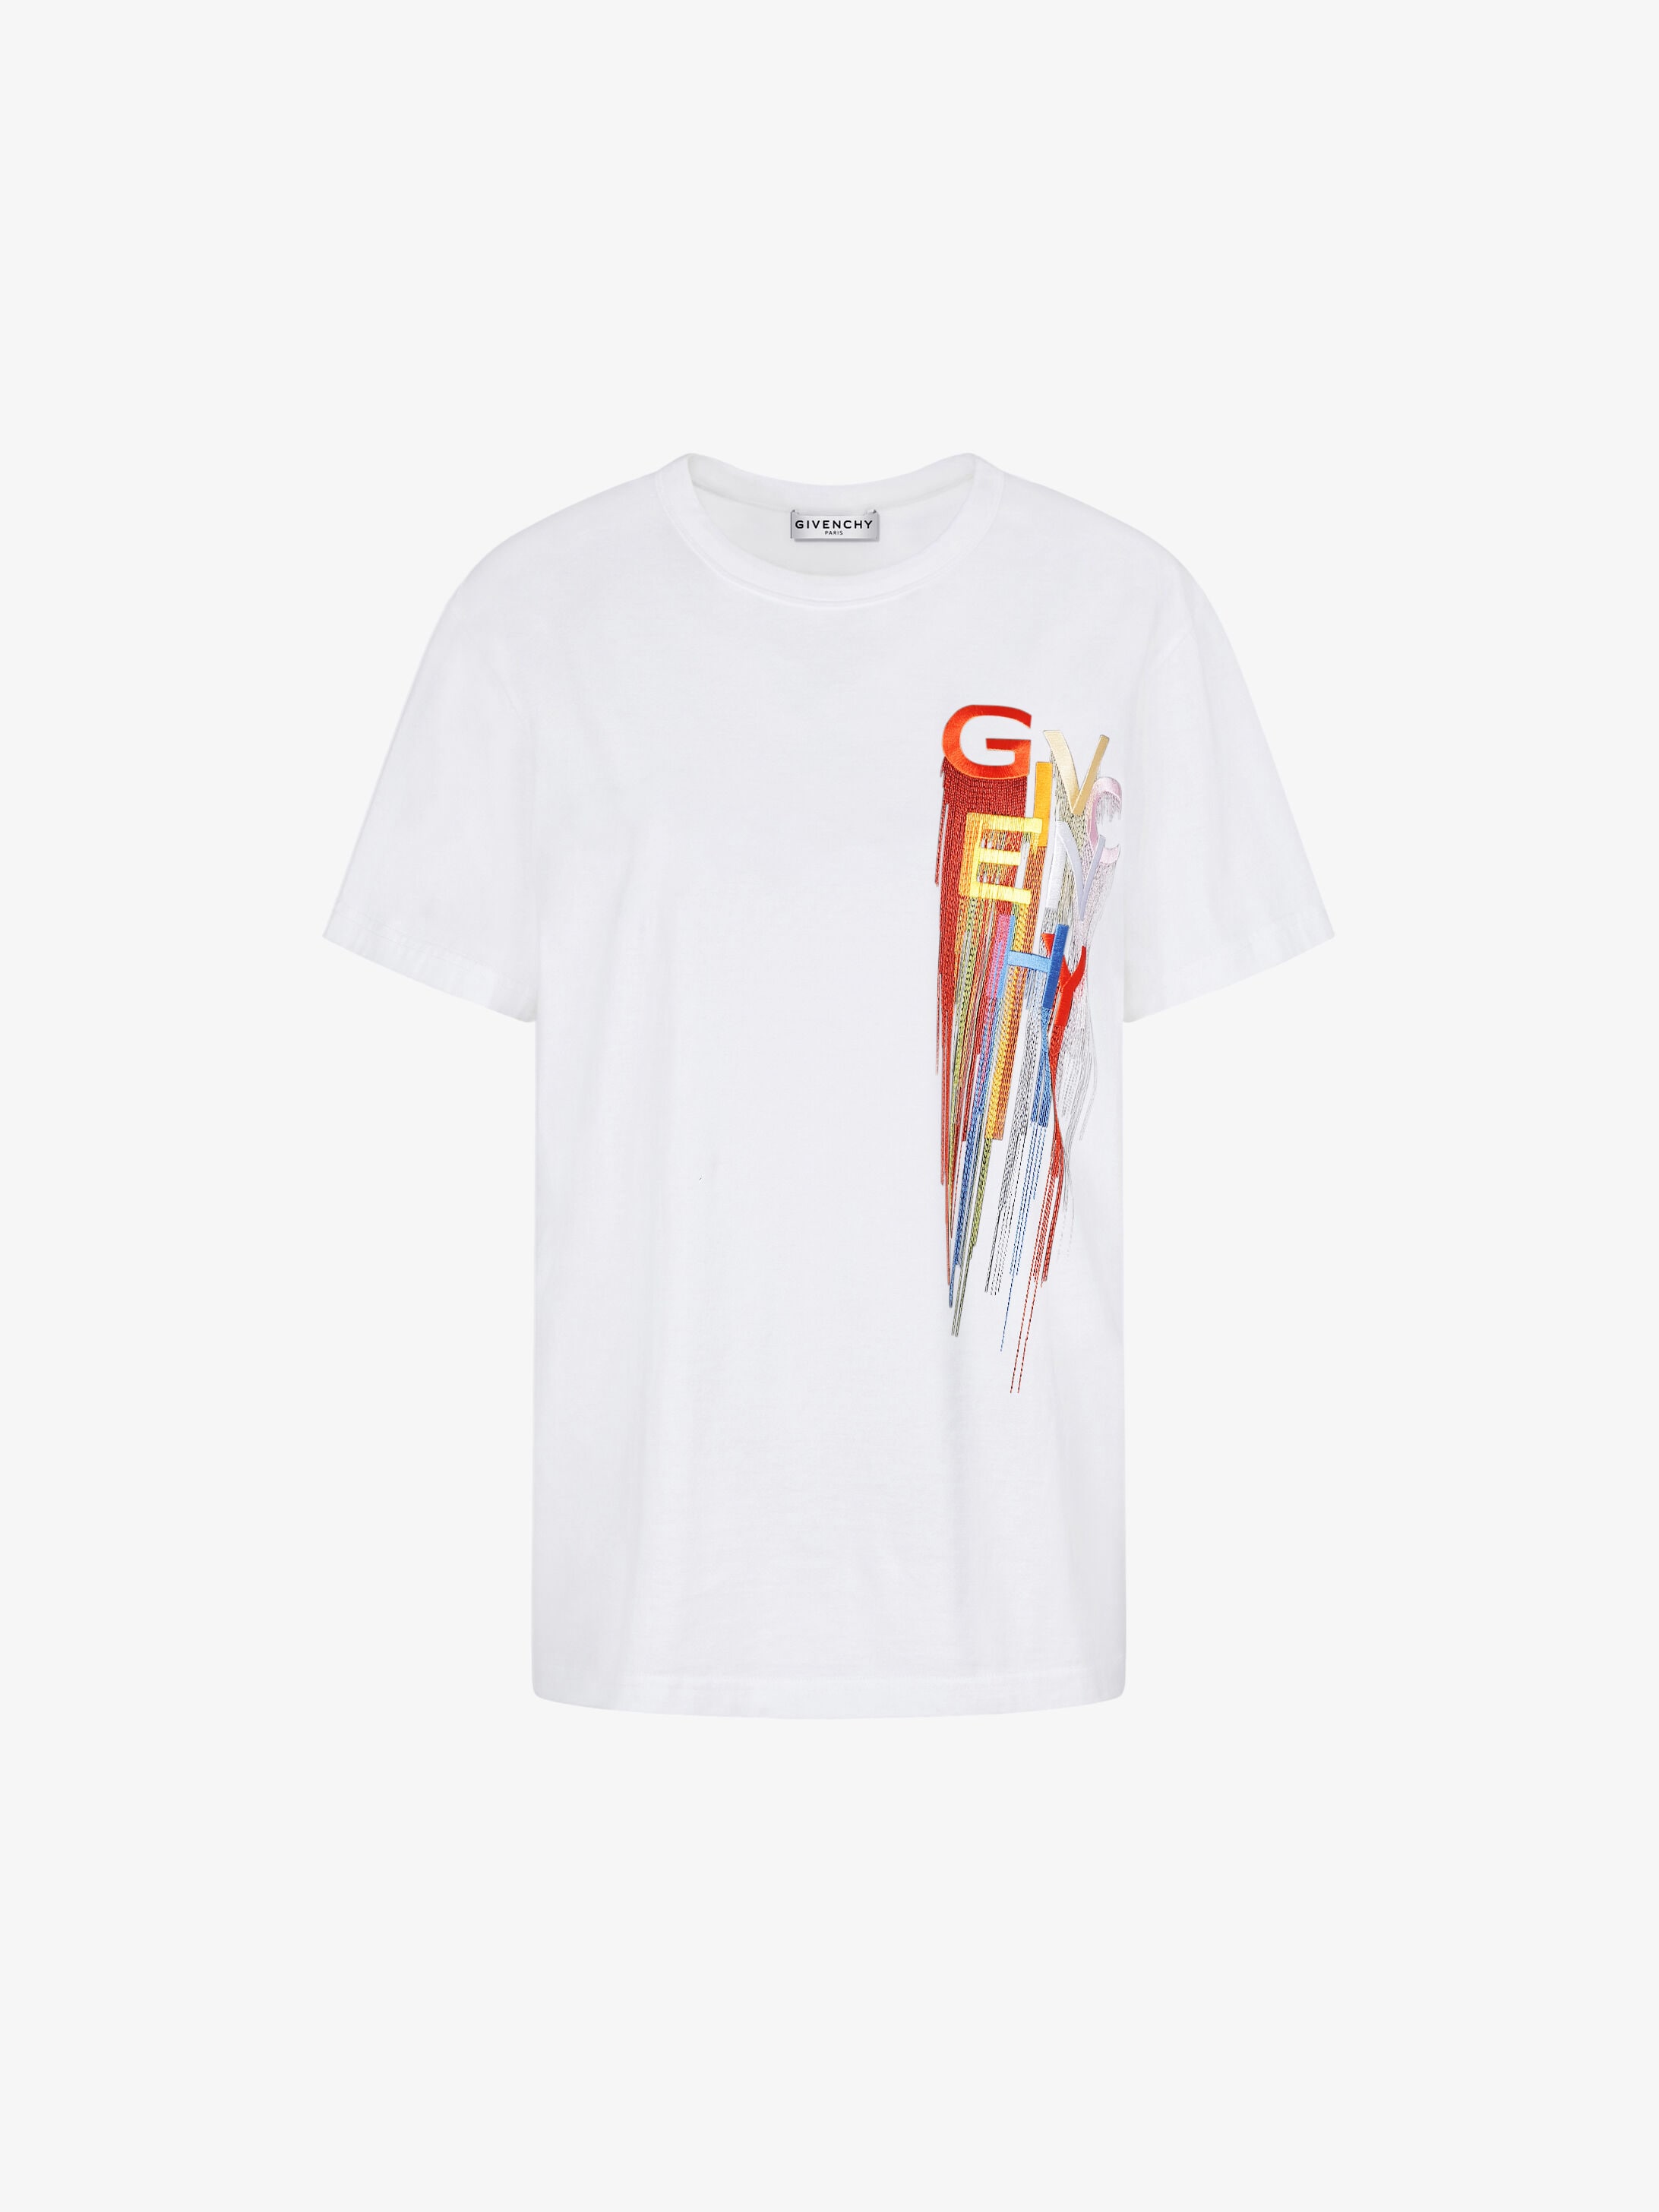 givenchy tee womens